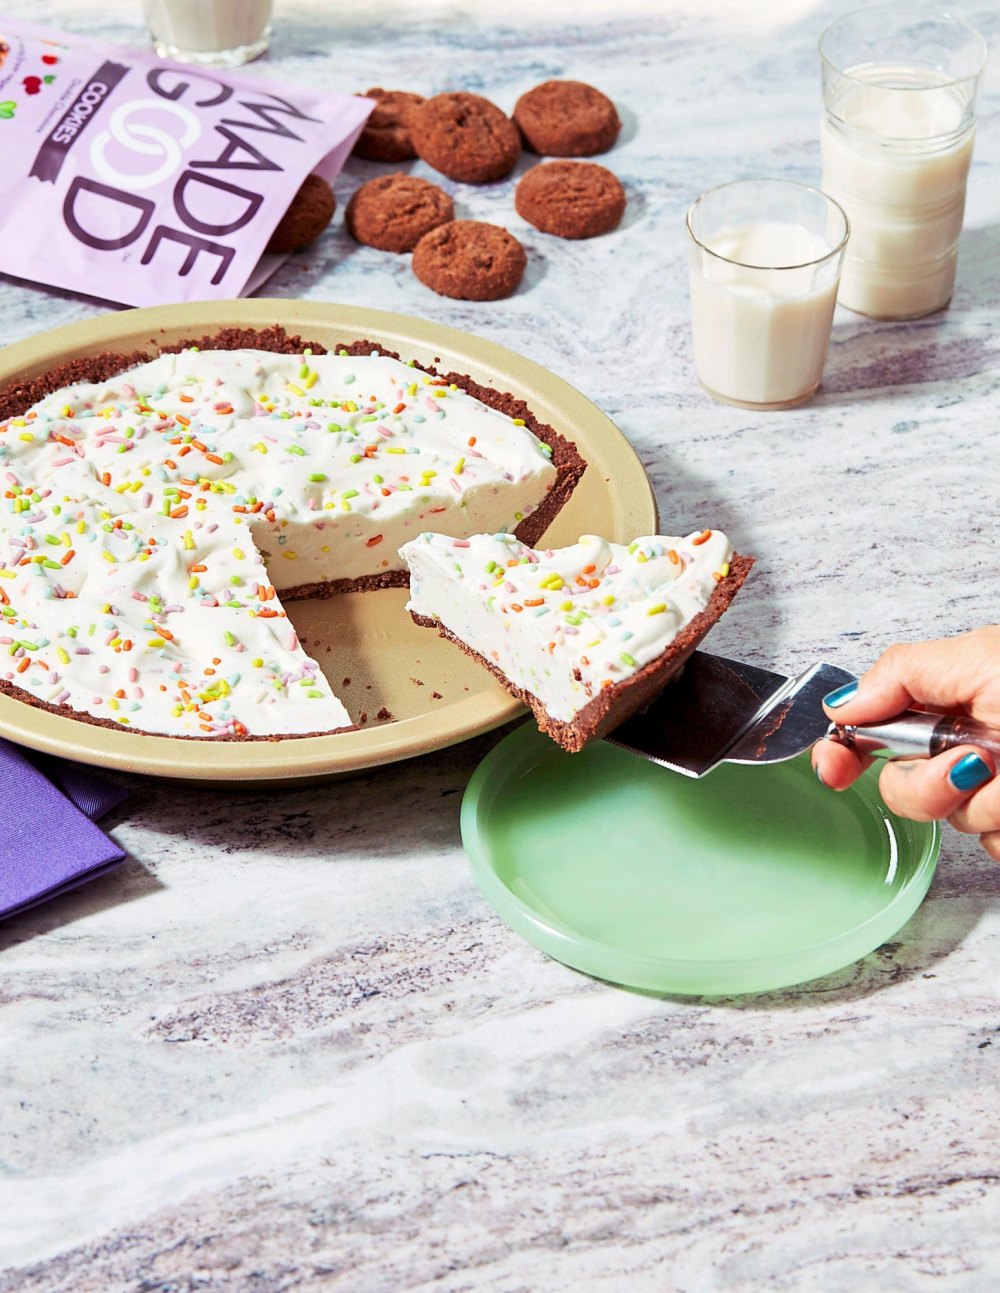 Girl Meets Farms Molly Yeh s Sprinkle Ice Cream Pie 905